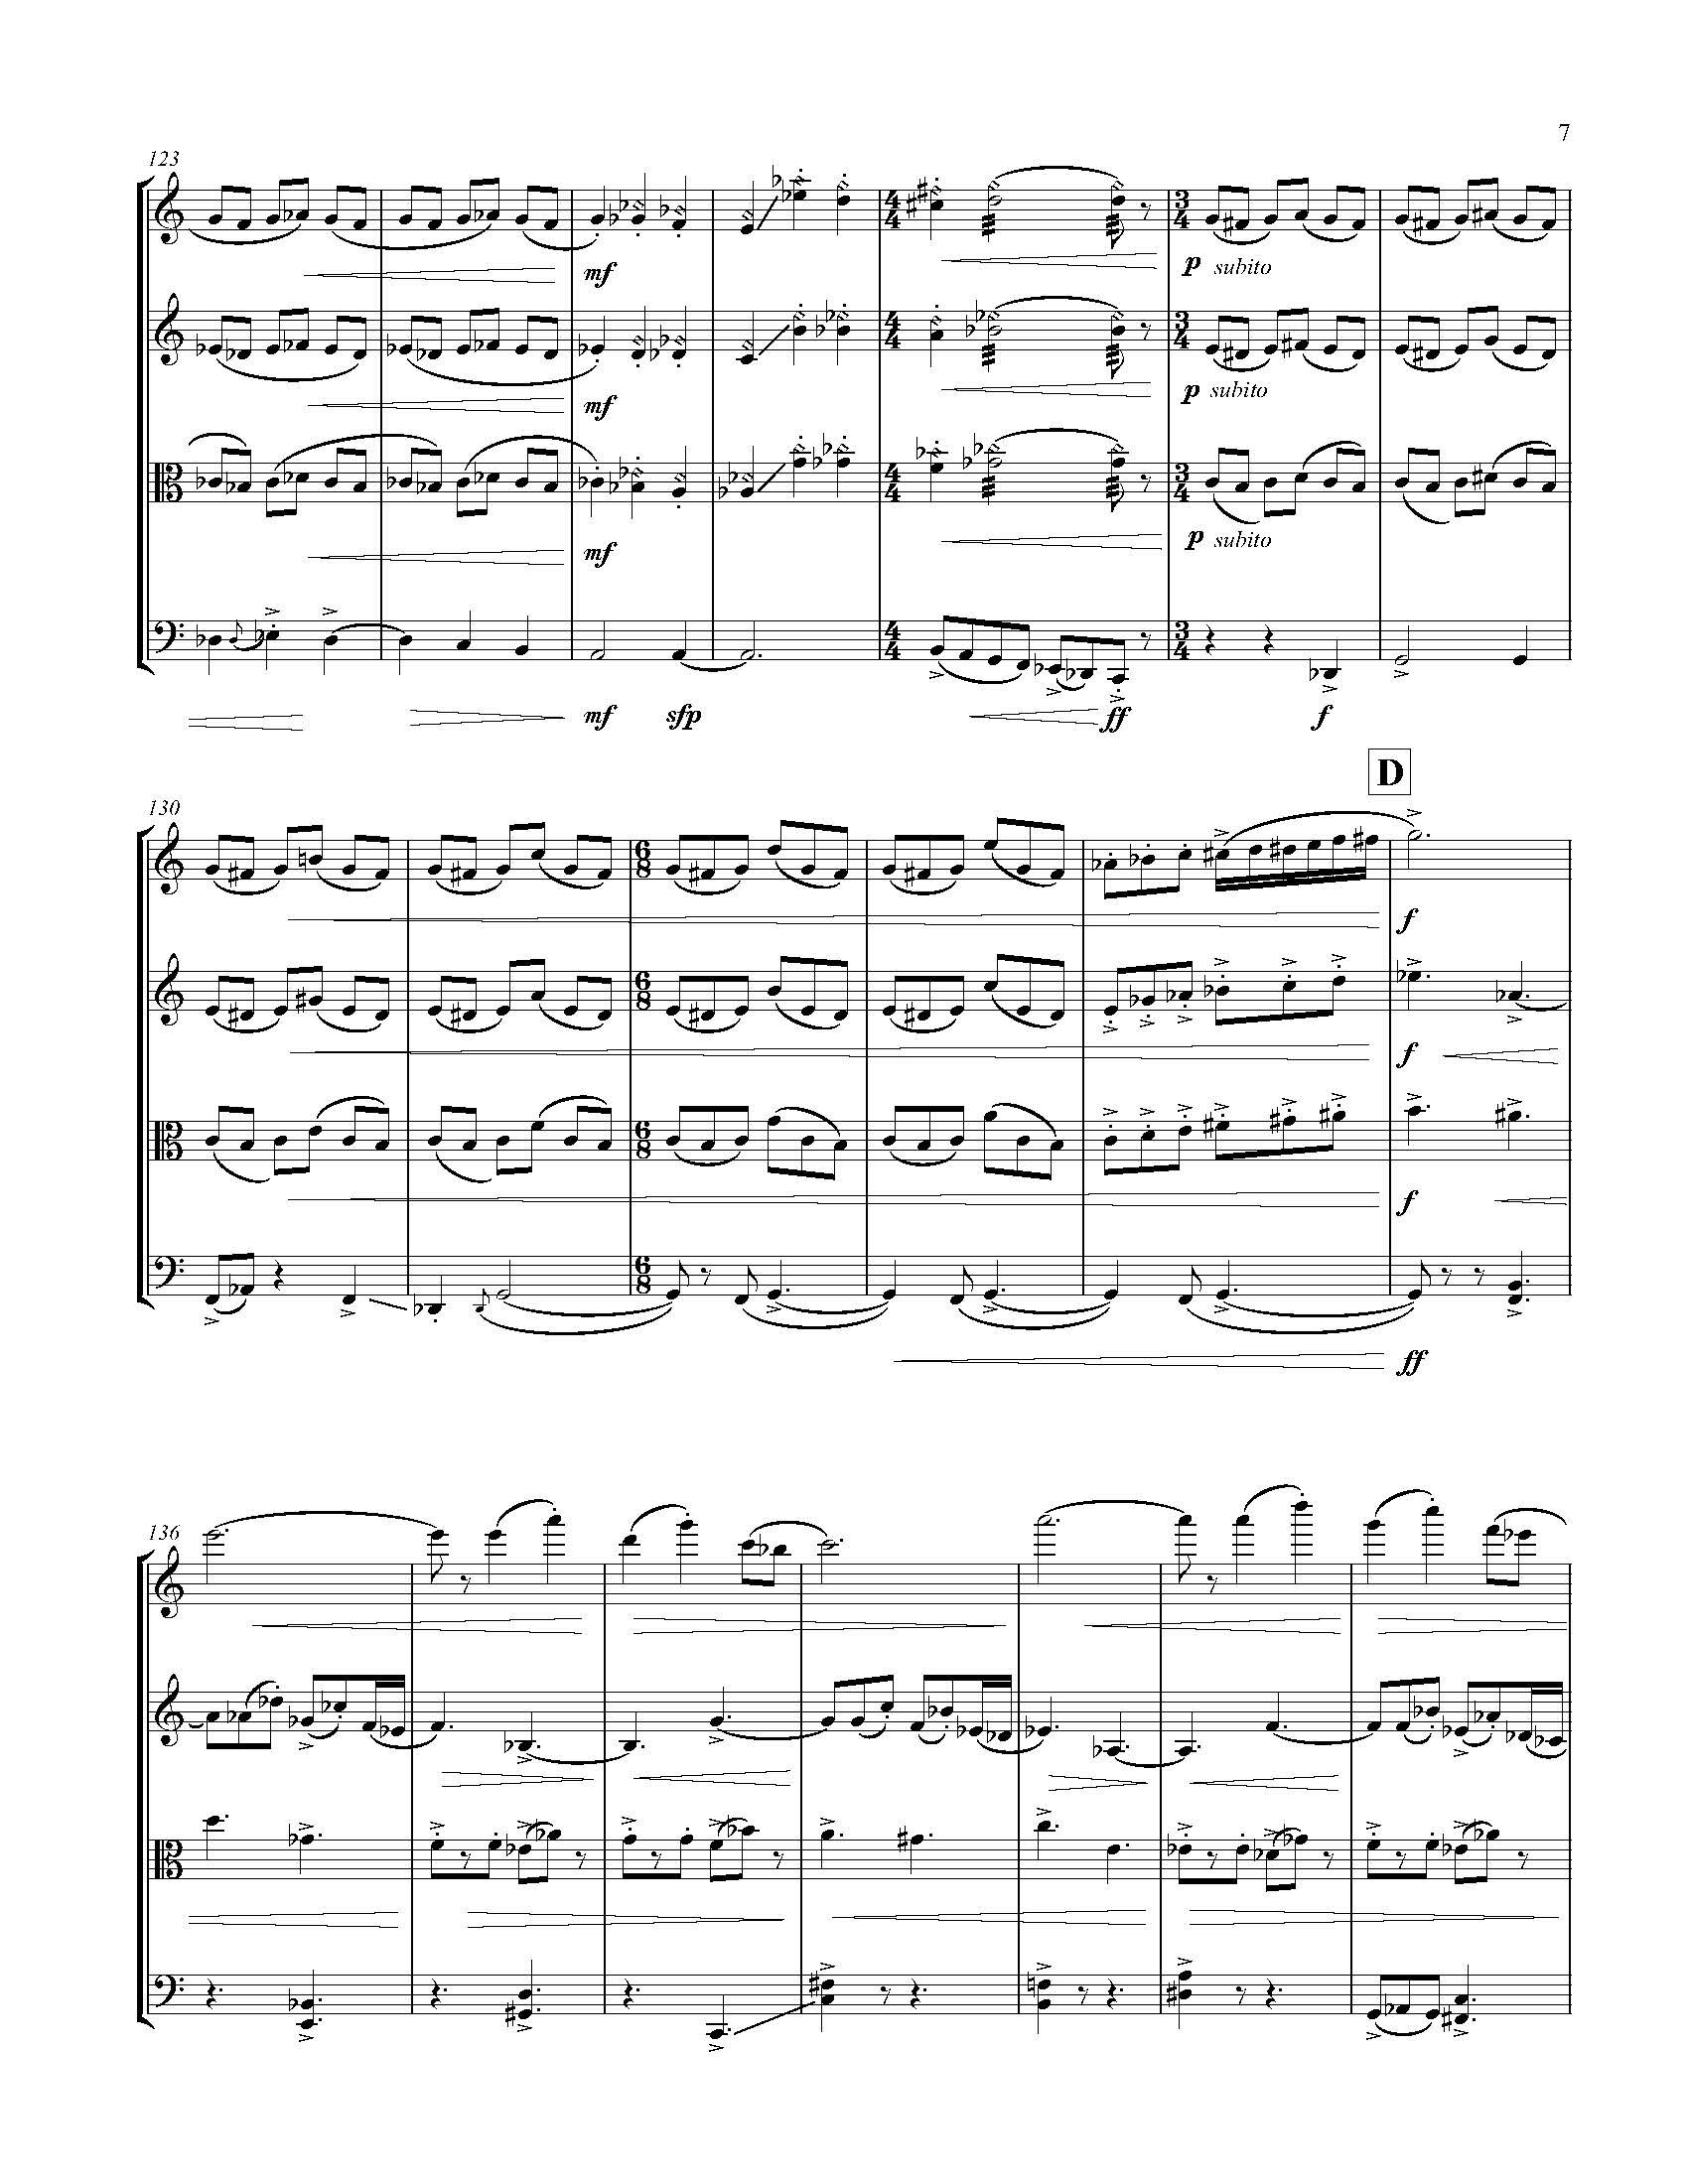 A Country of Vast Designs - Complete Score_Page_13.jpg